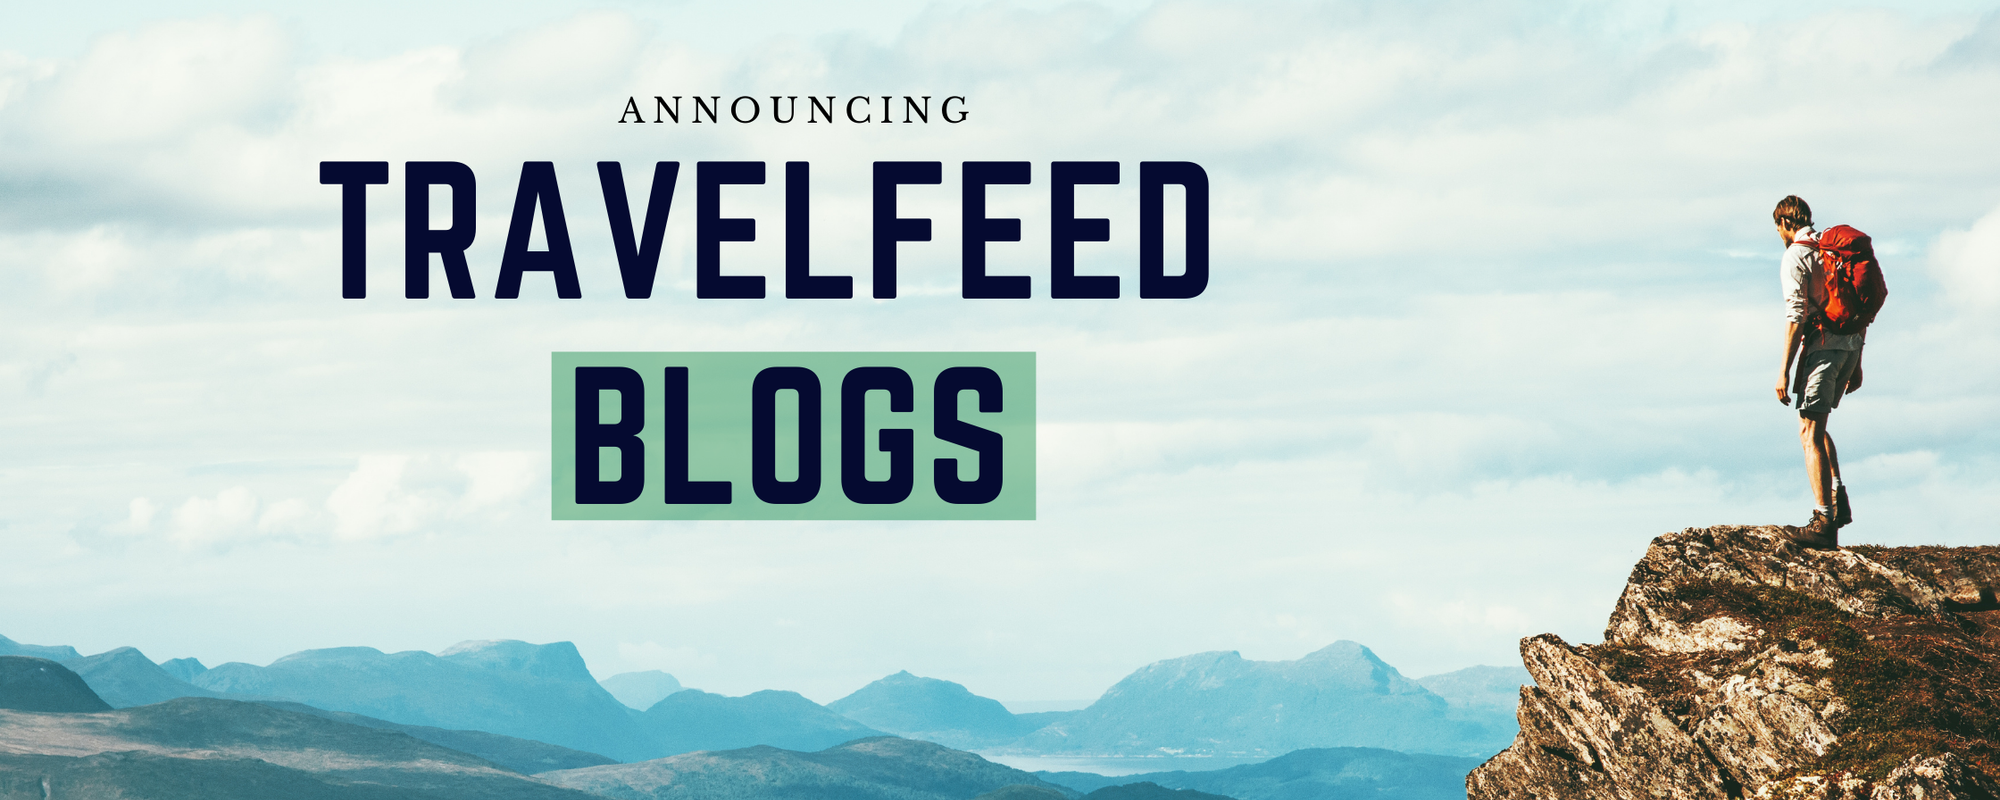 TravelFeed blogs are live: Get yours now!